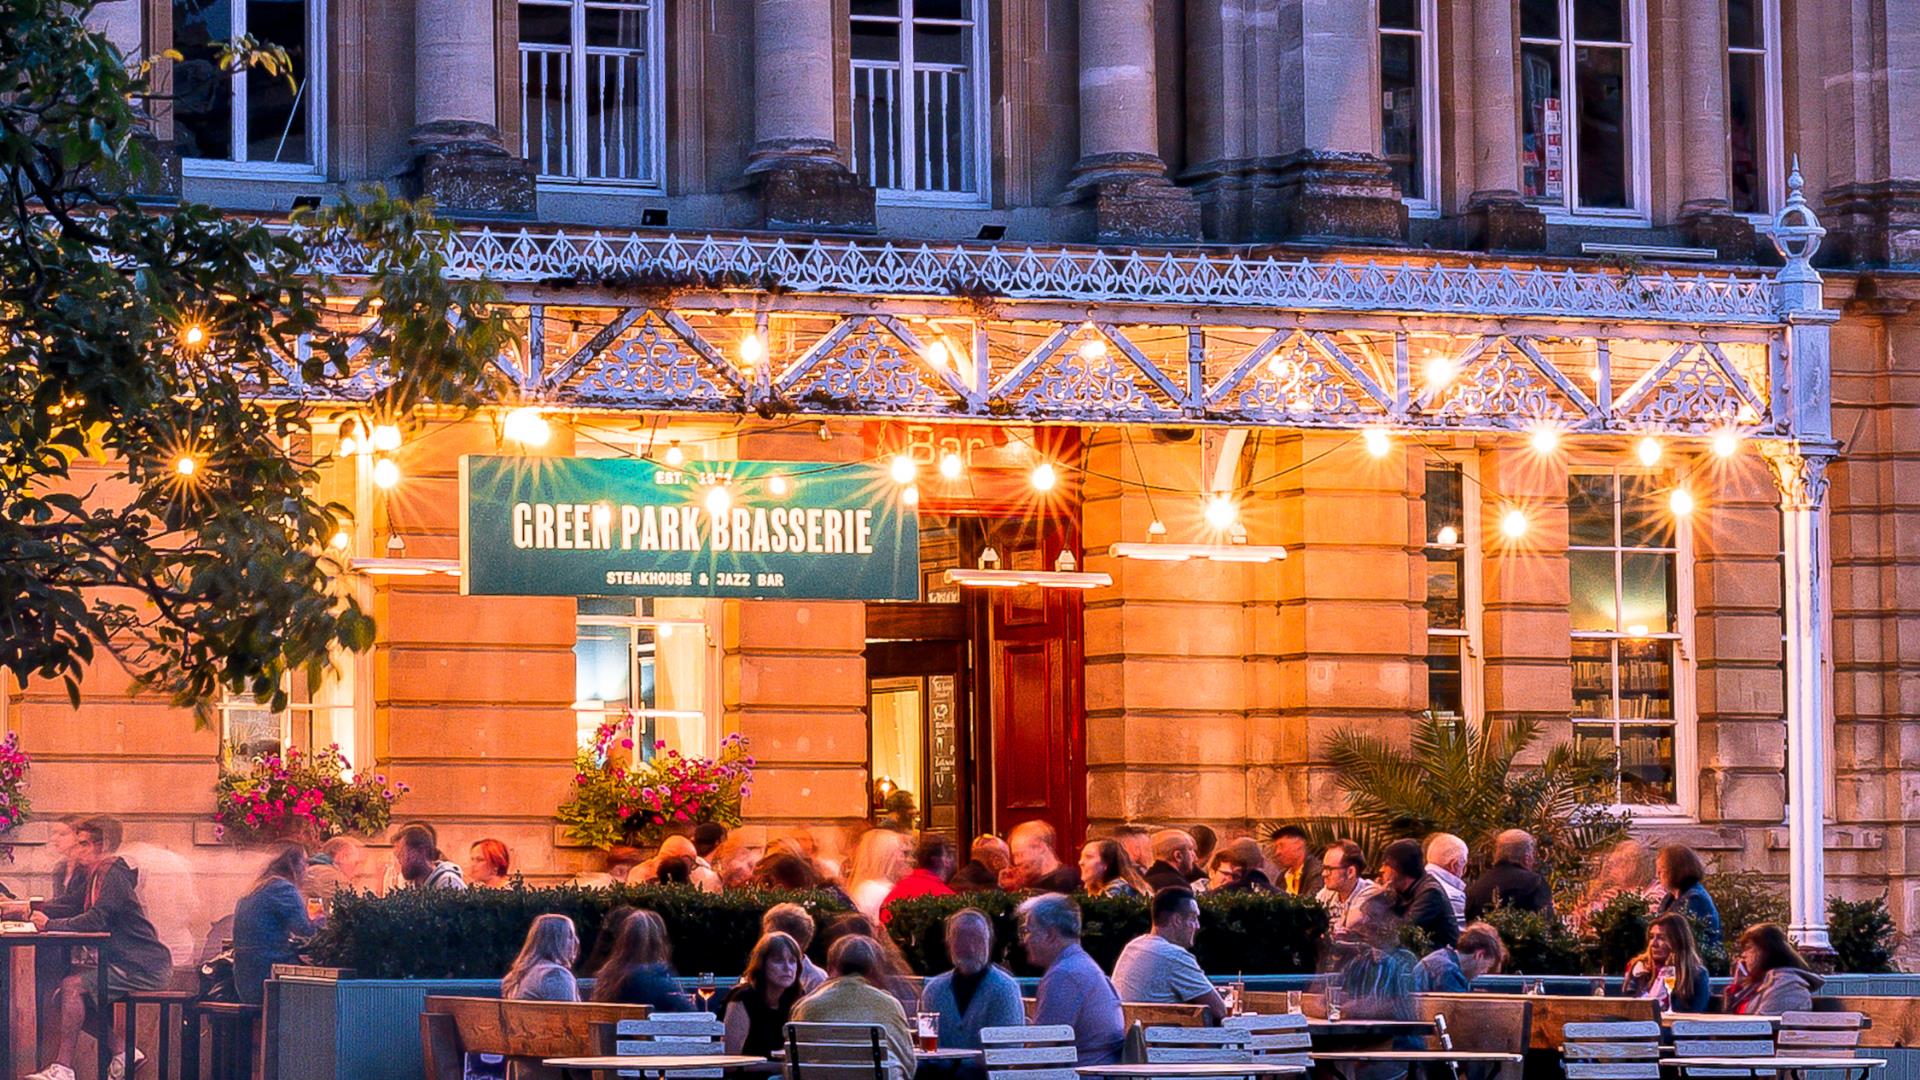 Green Park Brasserie front terrace lit up with sign